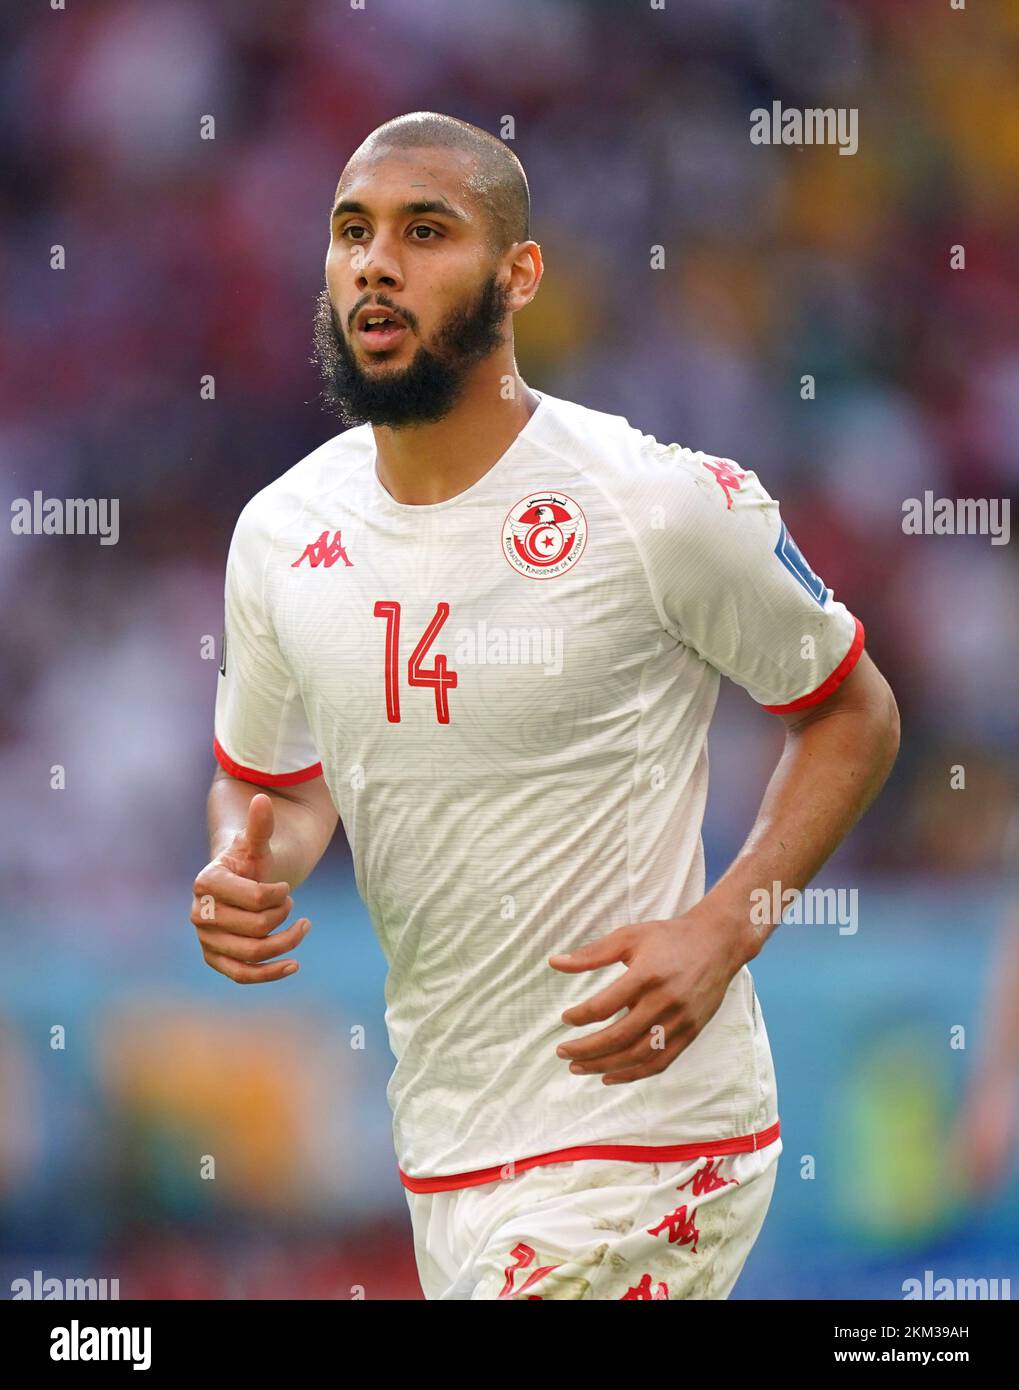 Tunisia's Aissa Laidouni during the FIFA World Cup Group D match at the Al Janoub Stadium in Al-Wakrah, Qatar. Picture date: Saturday November 26, 2022. Stock Photo